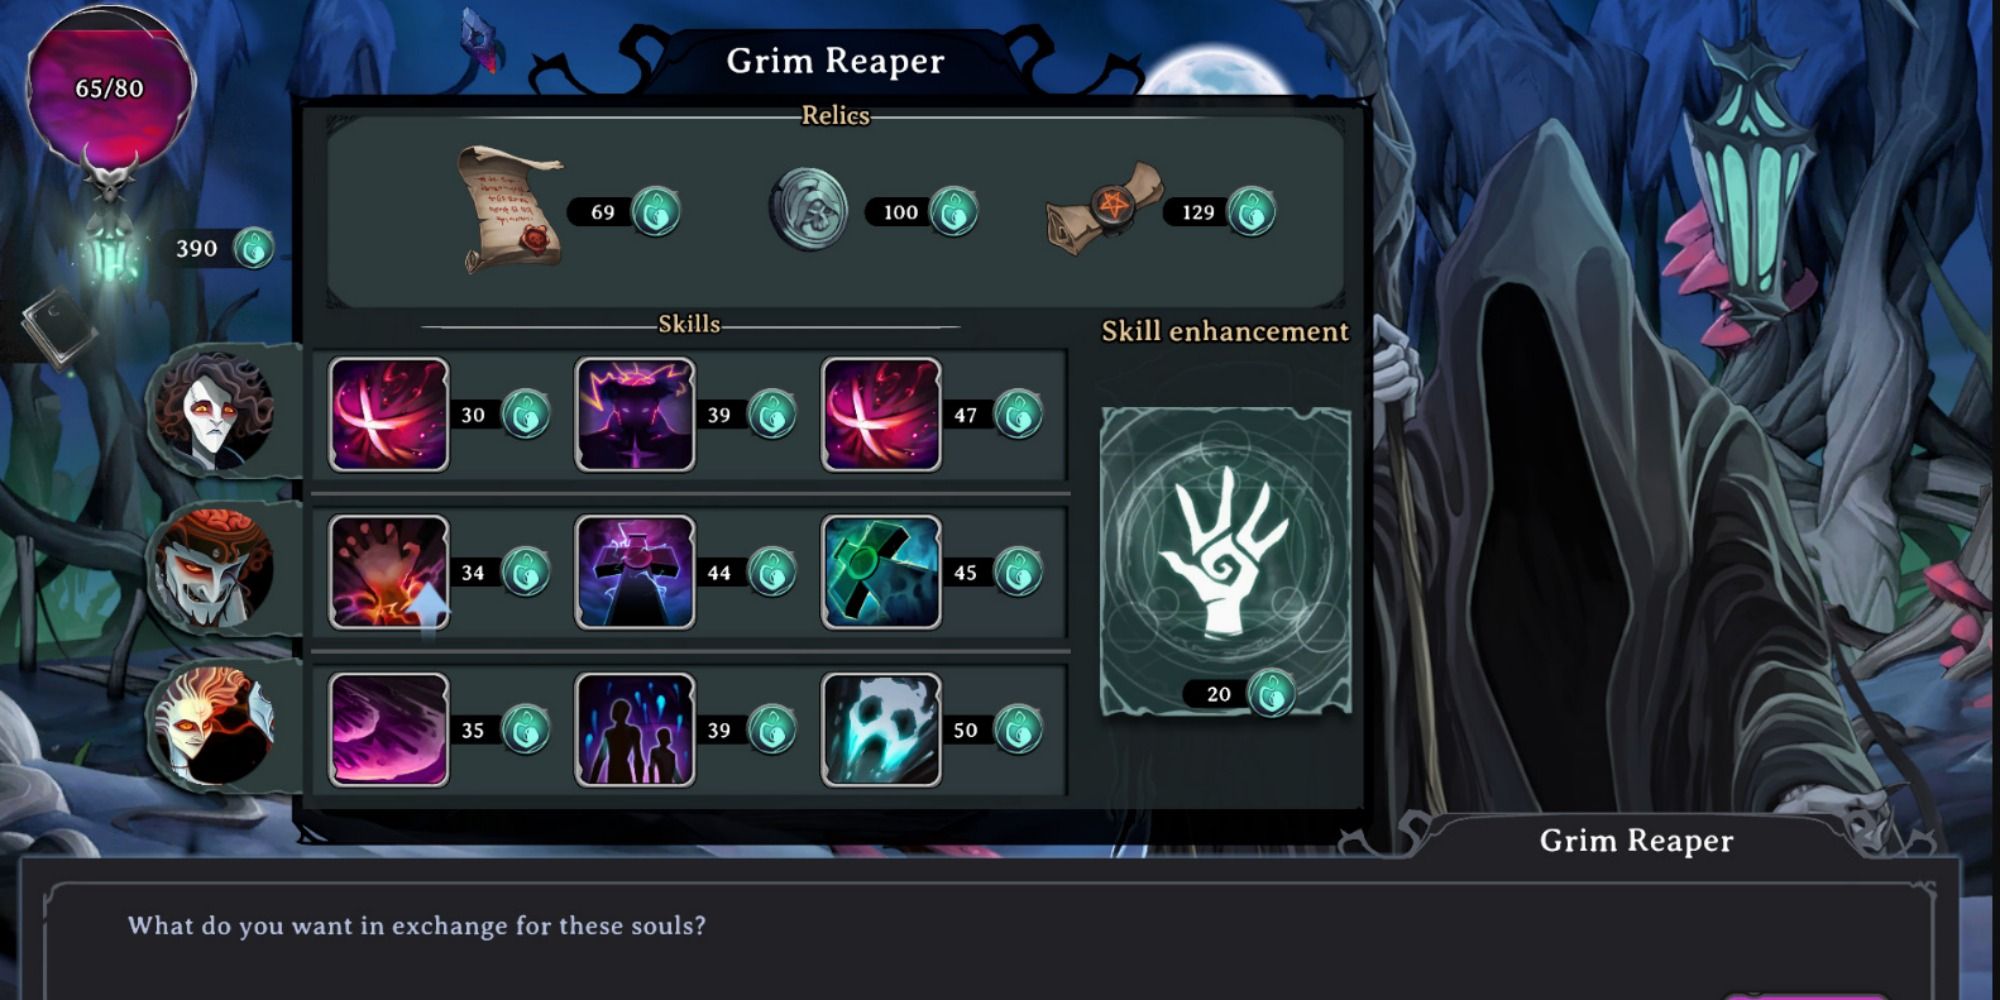 relics and skills menu from the grim reaper in rogue lords